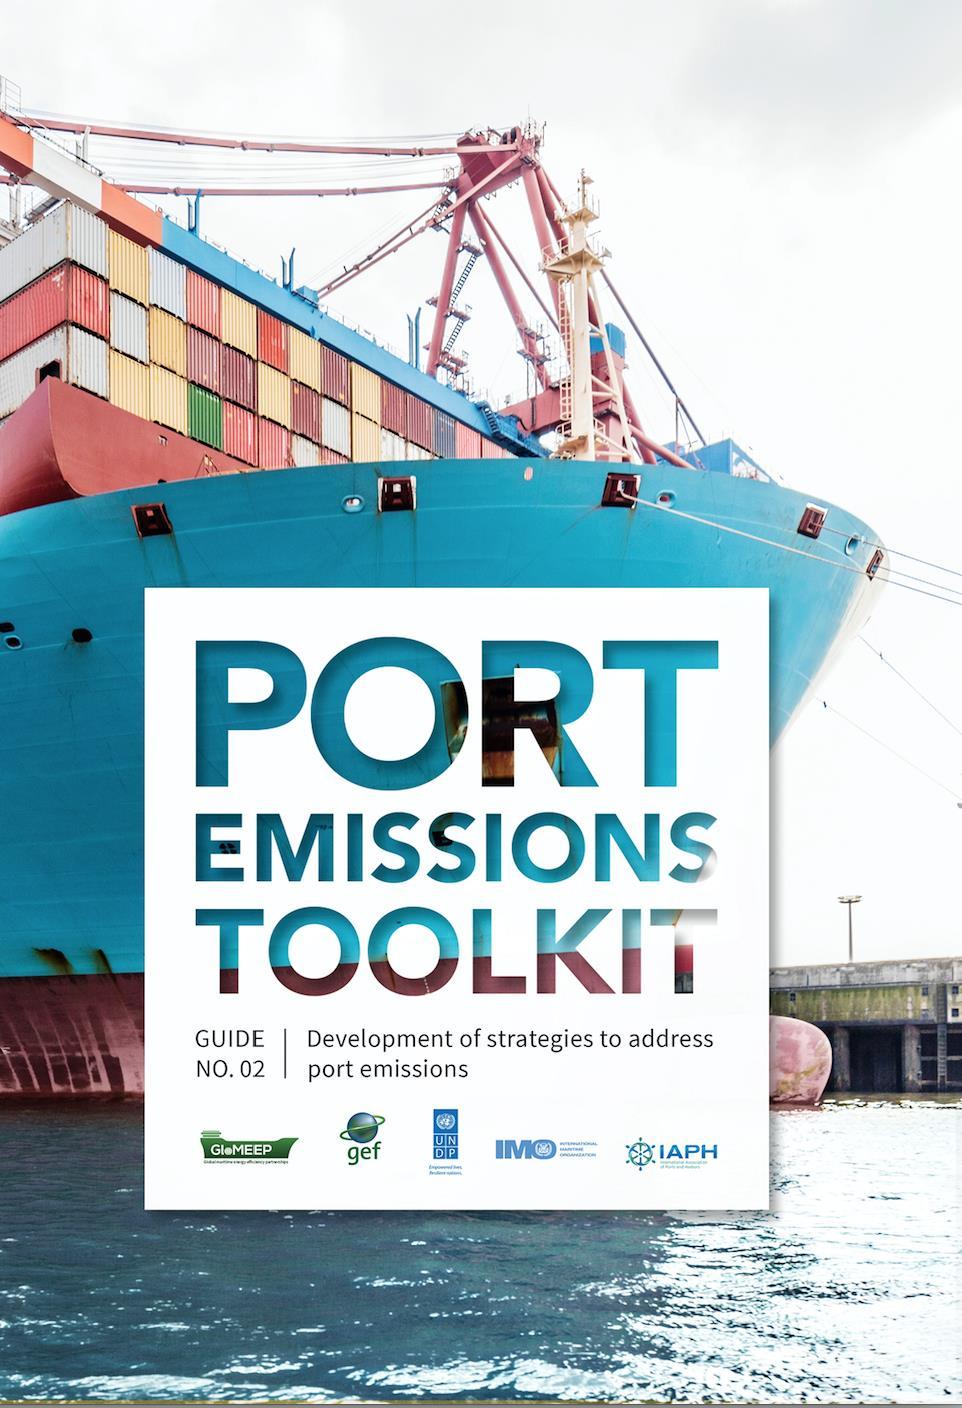 Guide for the Development of a Port Emissions Reduction Strategy Covers critical strategy planning elements - Drivers - Challenges & opportunities for viable strategies - Pollutant/GHG hierarchy -